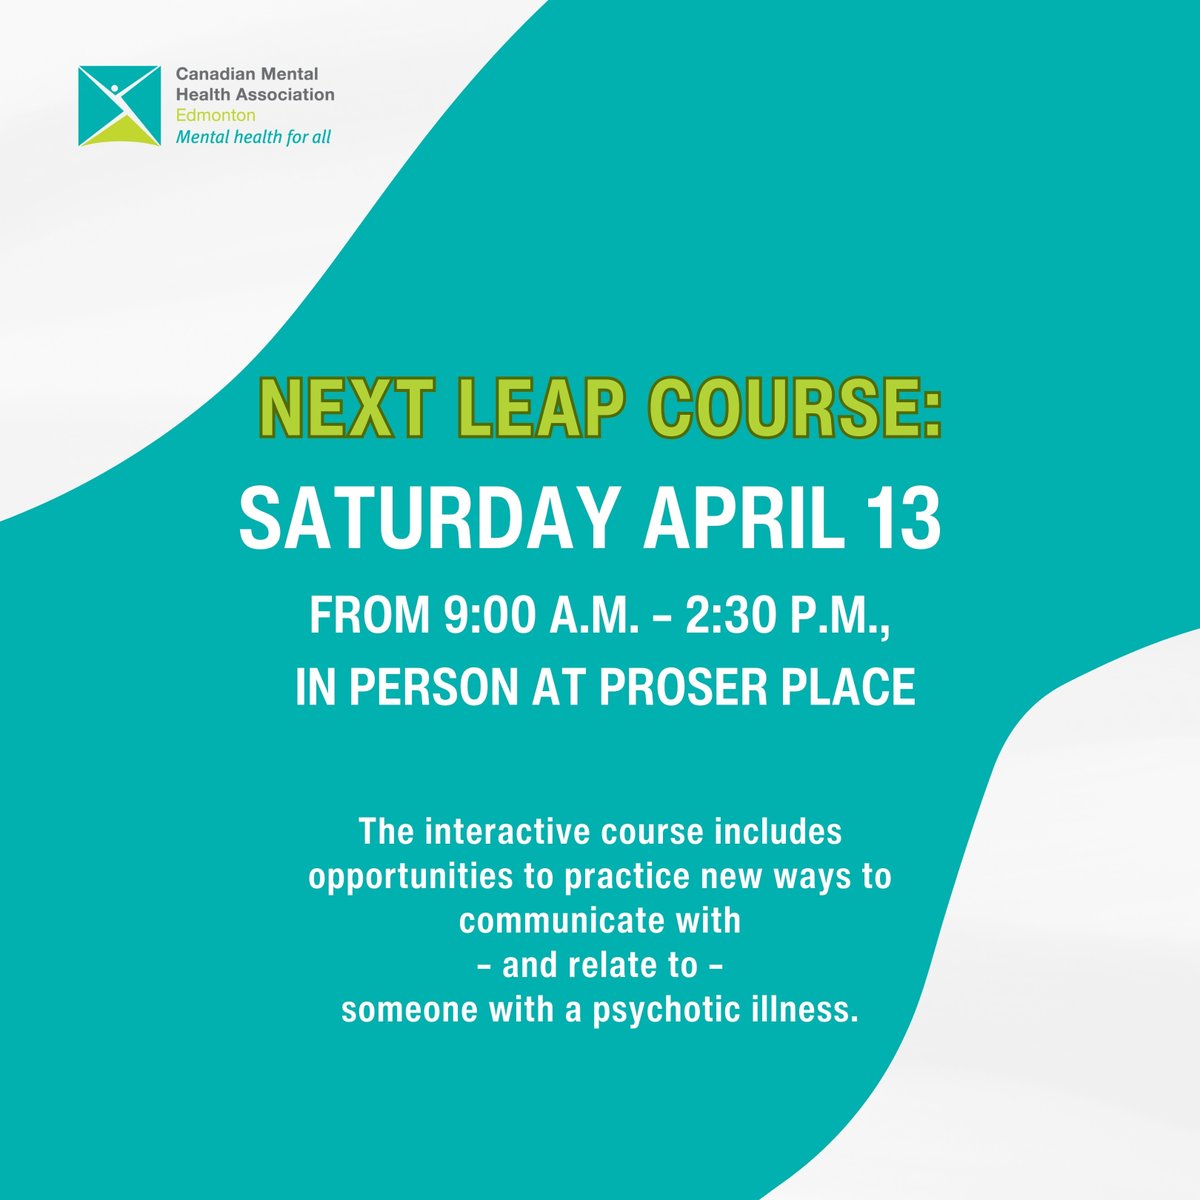 FREE LEAP Course Training - Open to Anyone who needs help supporting someone who has a psychotic illness. Our next course is April 13, 2024 in person at Prosper Place, from 9 AM to 2:30 PM. #CMHAResources #yegmentalhealth #mentalhealthmatters #freementalhealthresources